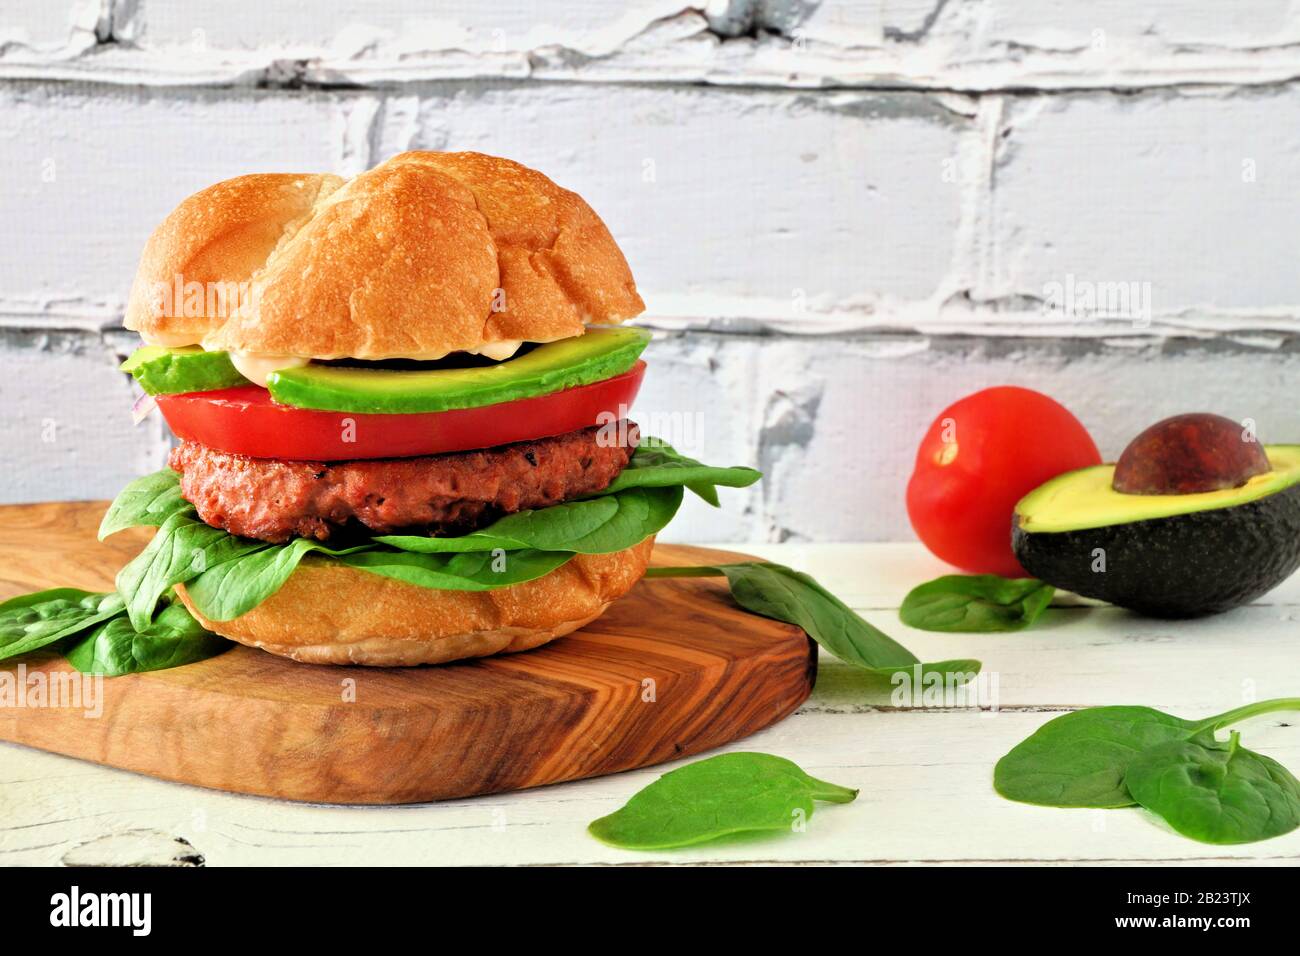 Plant based meatless burger with avocado, tomato and spinach on a wood serving board against a white brick background Stock Photo